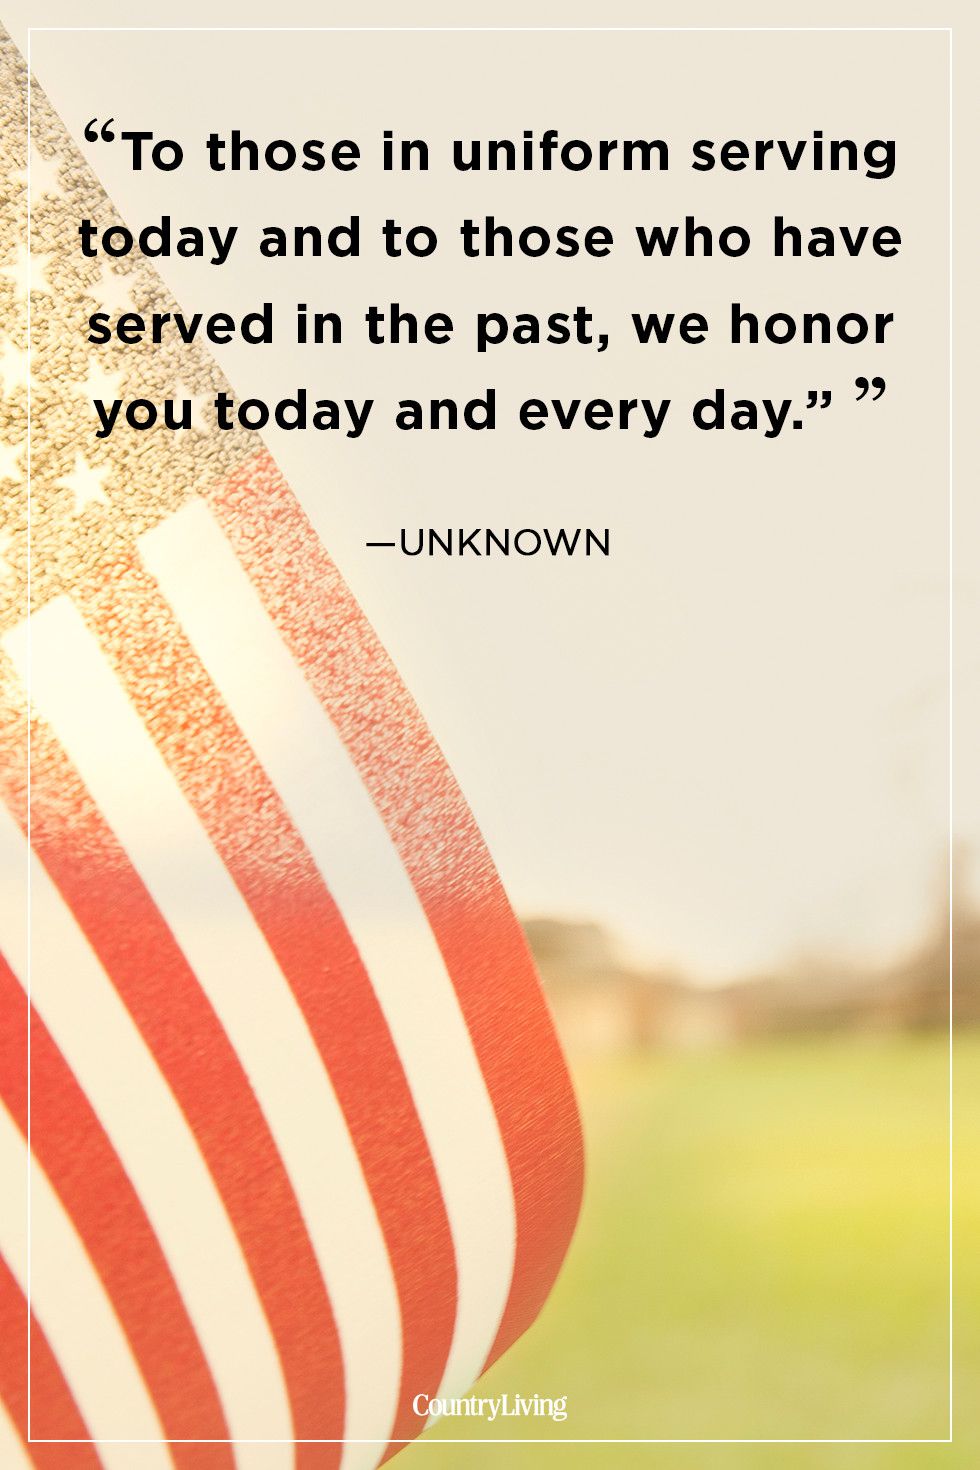 to those in uniform serving today and to those who have served in the past, we honor you today and every day.